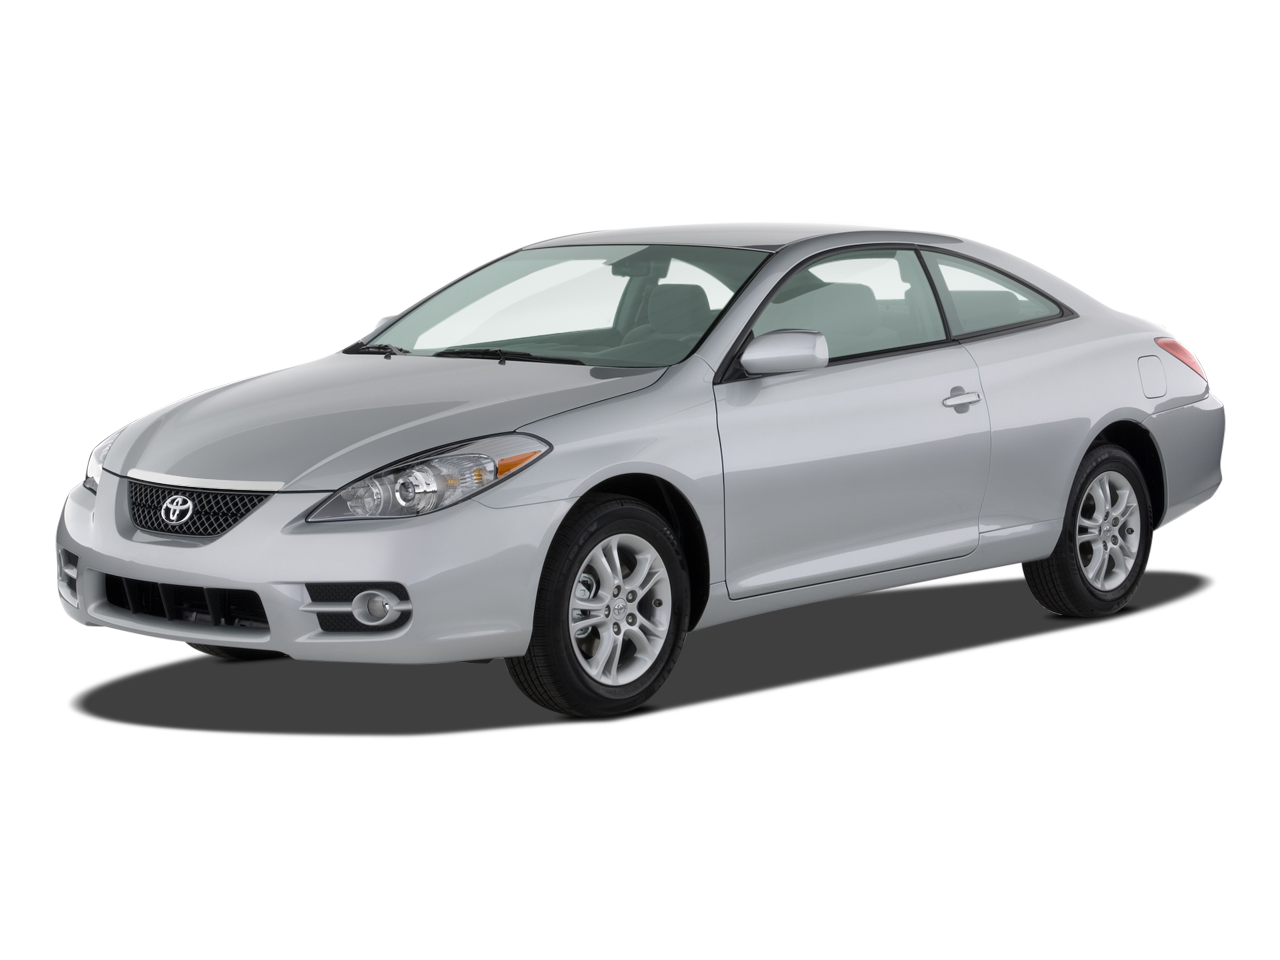 2008 Toyota Camry Solara Prices, Reviews, and Photos - MotorTrend